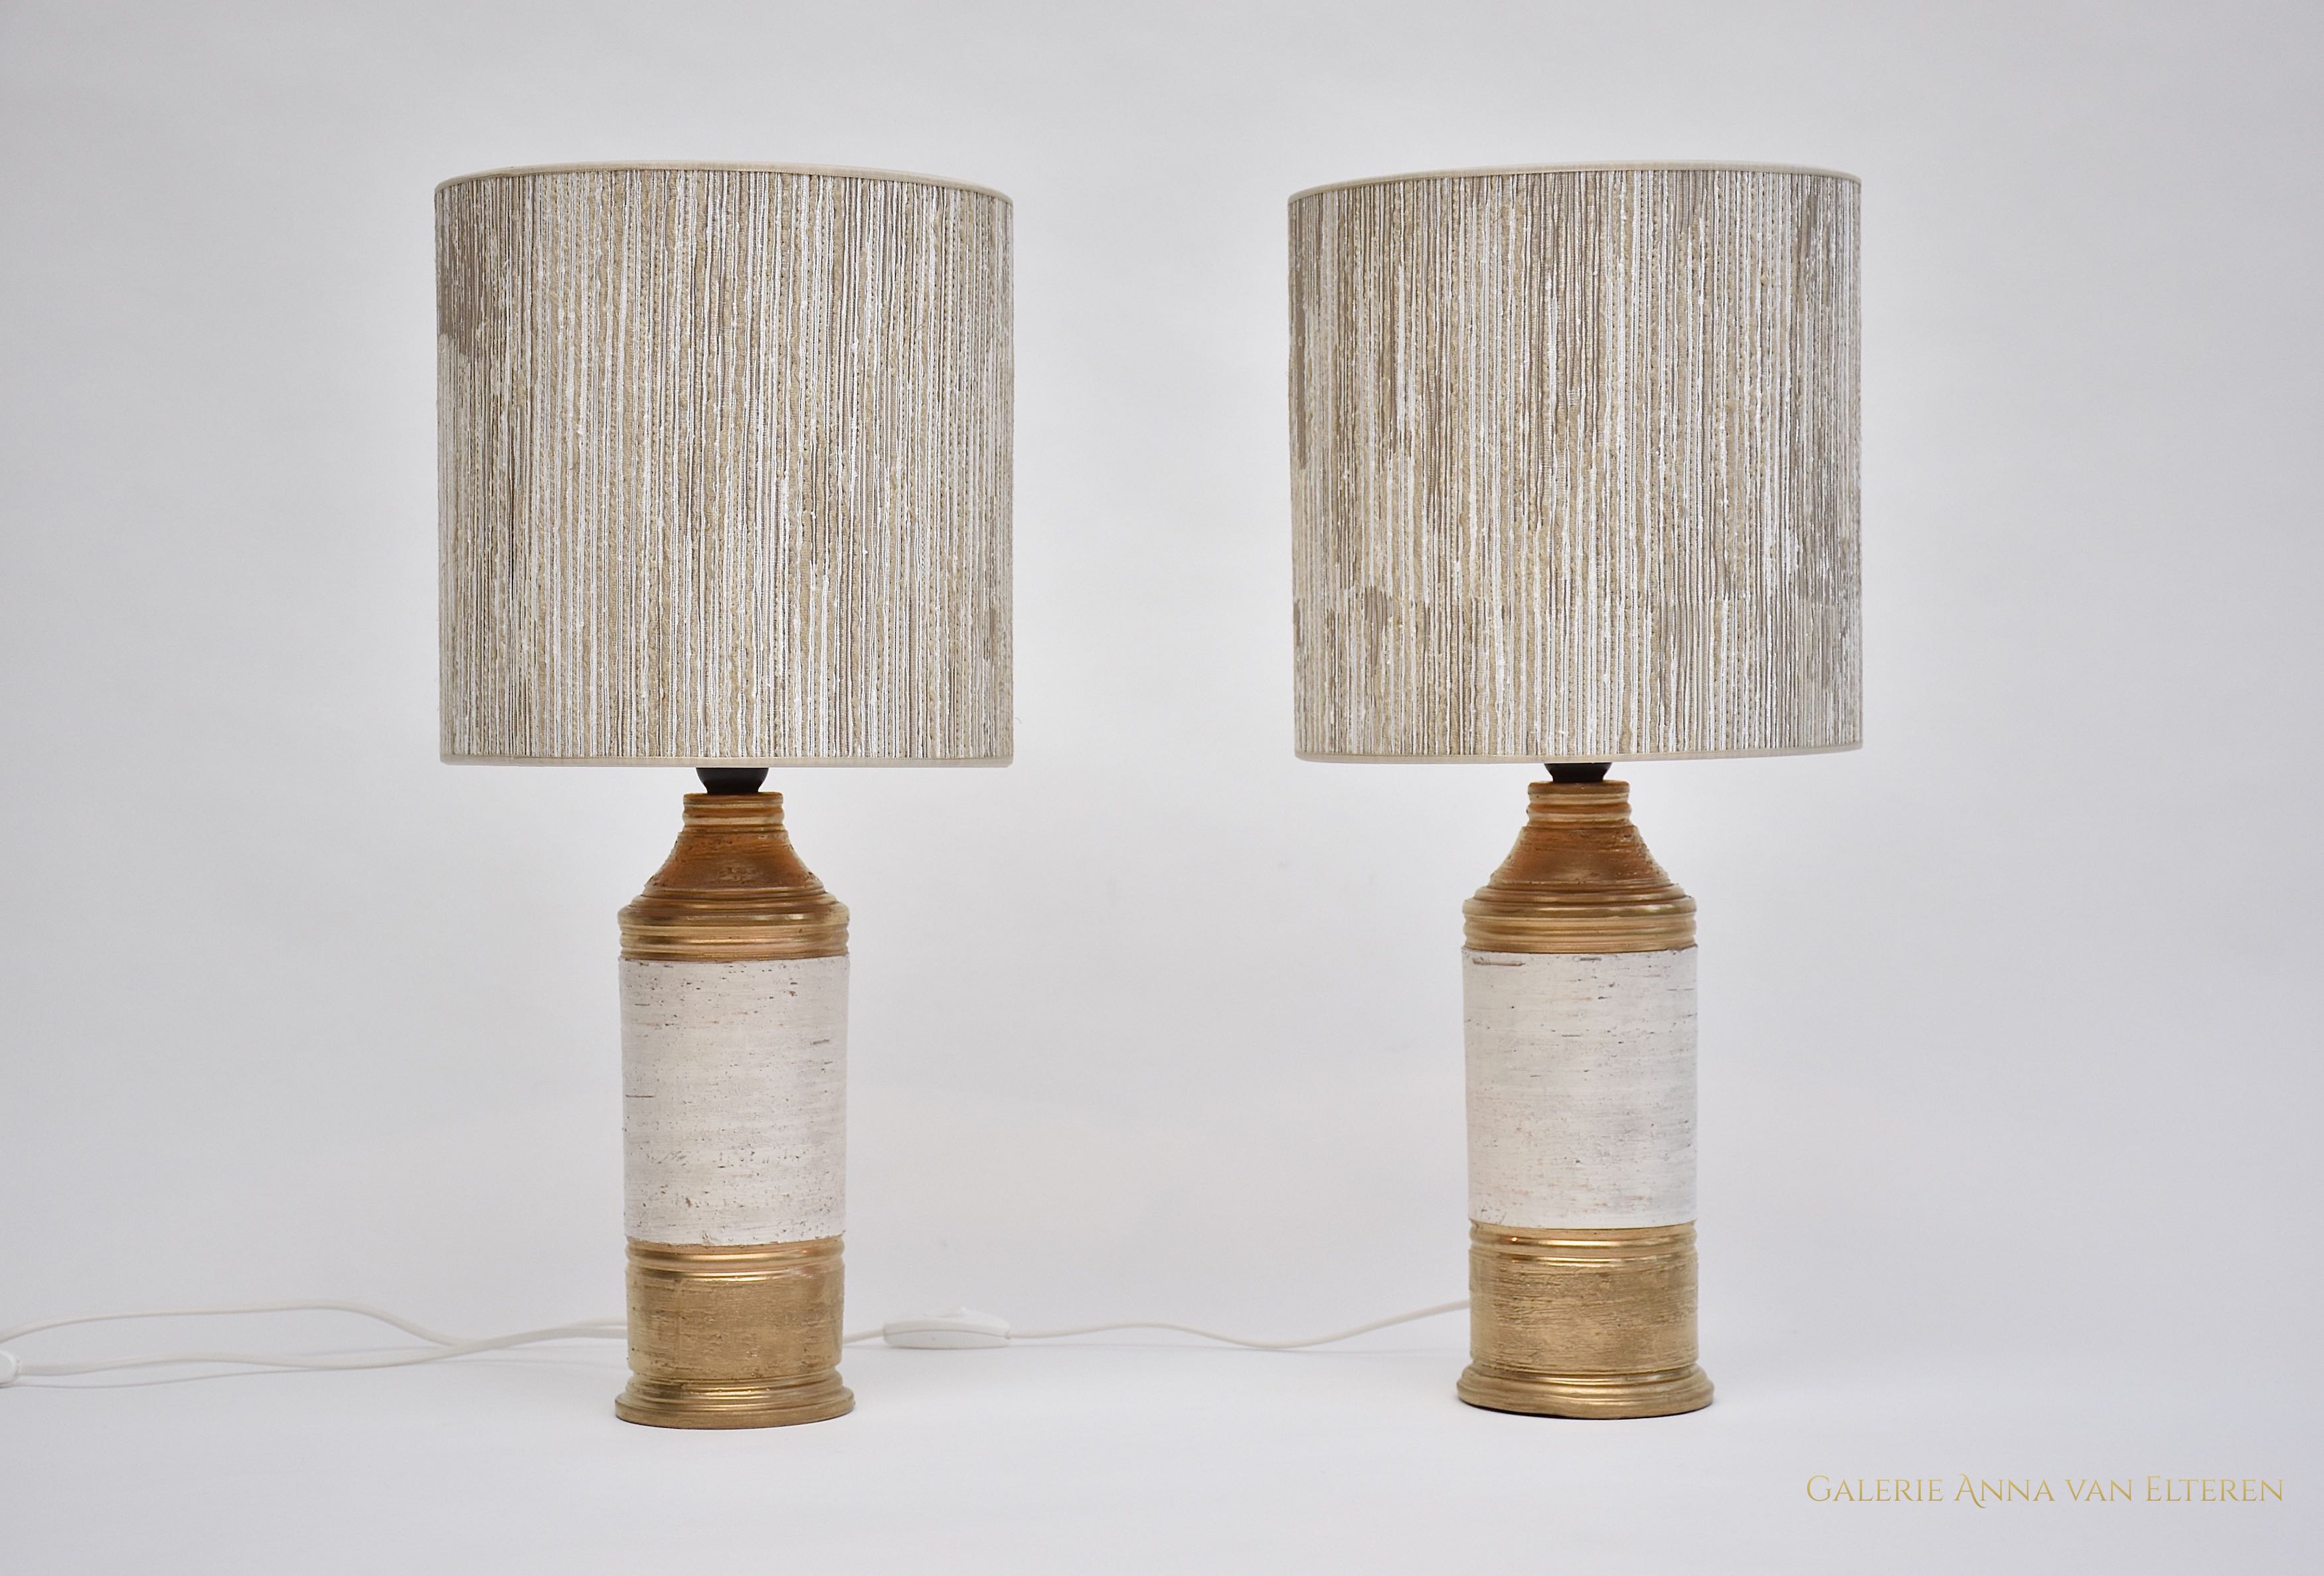 Mid-century pair ceramic table lamps by Bitossi